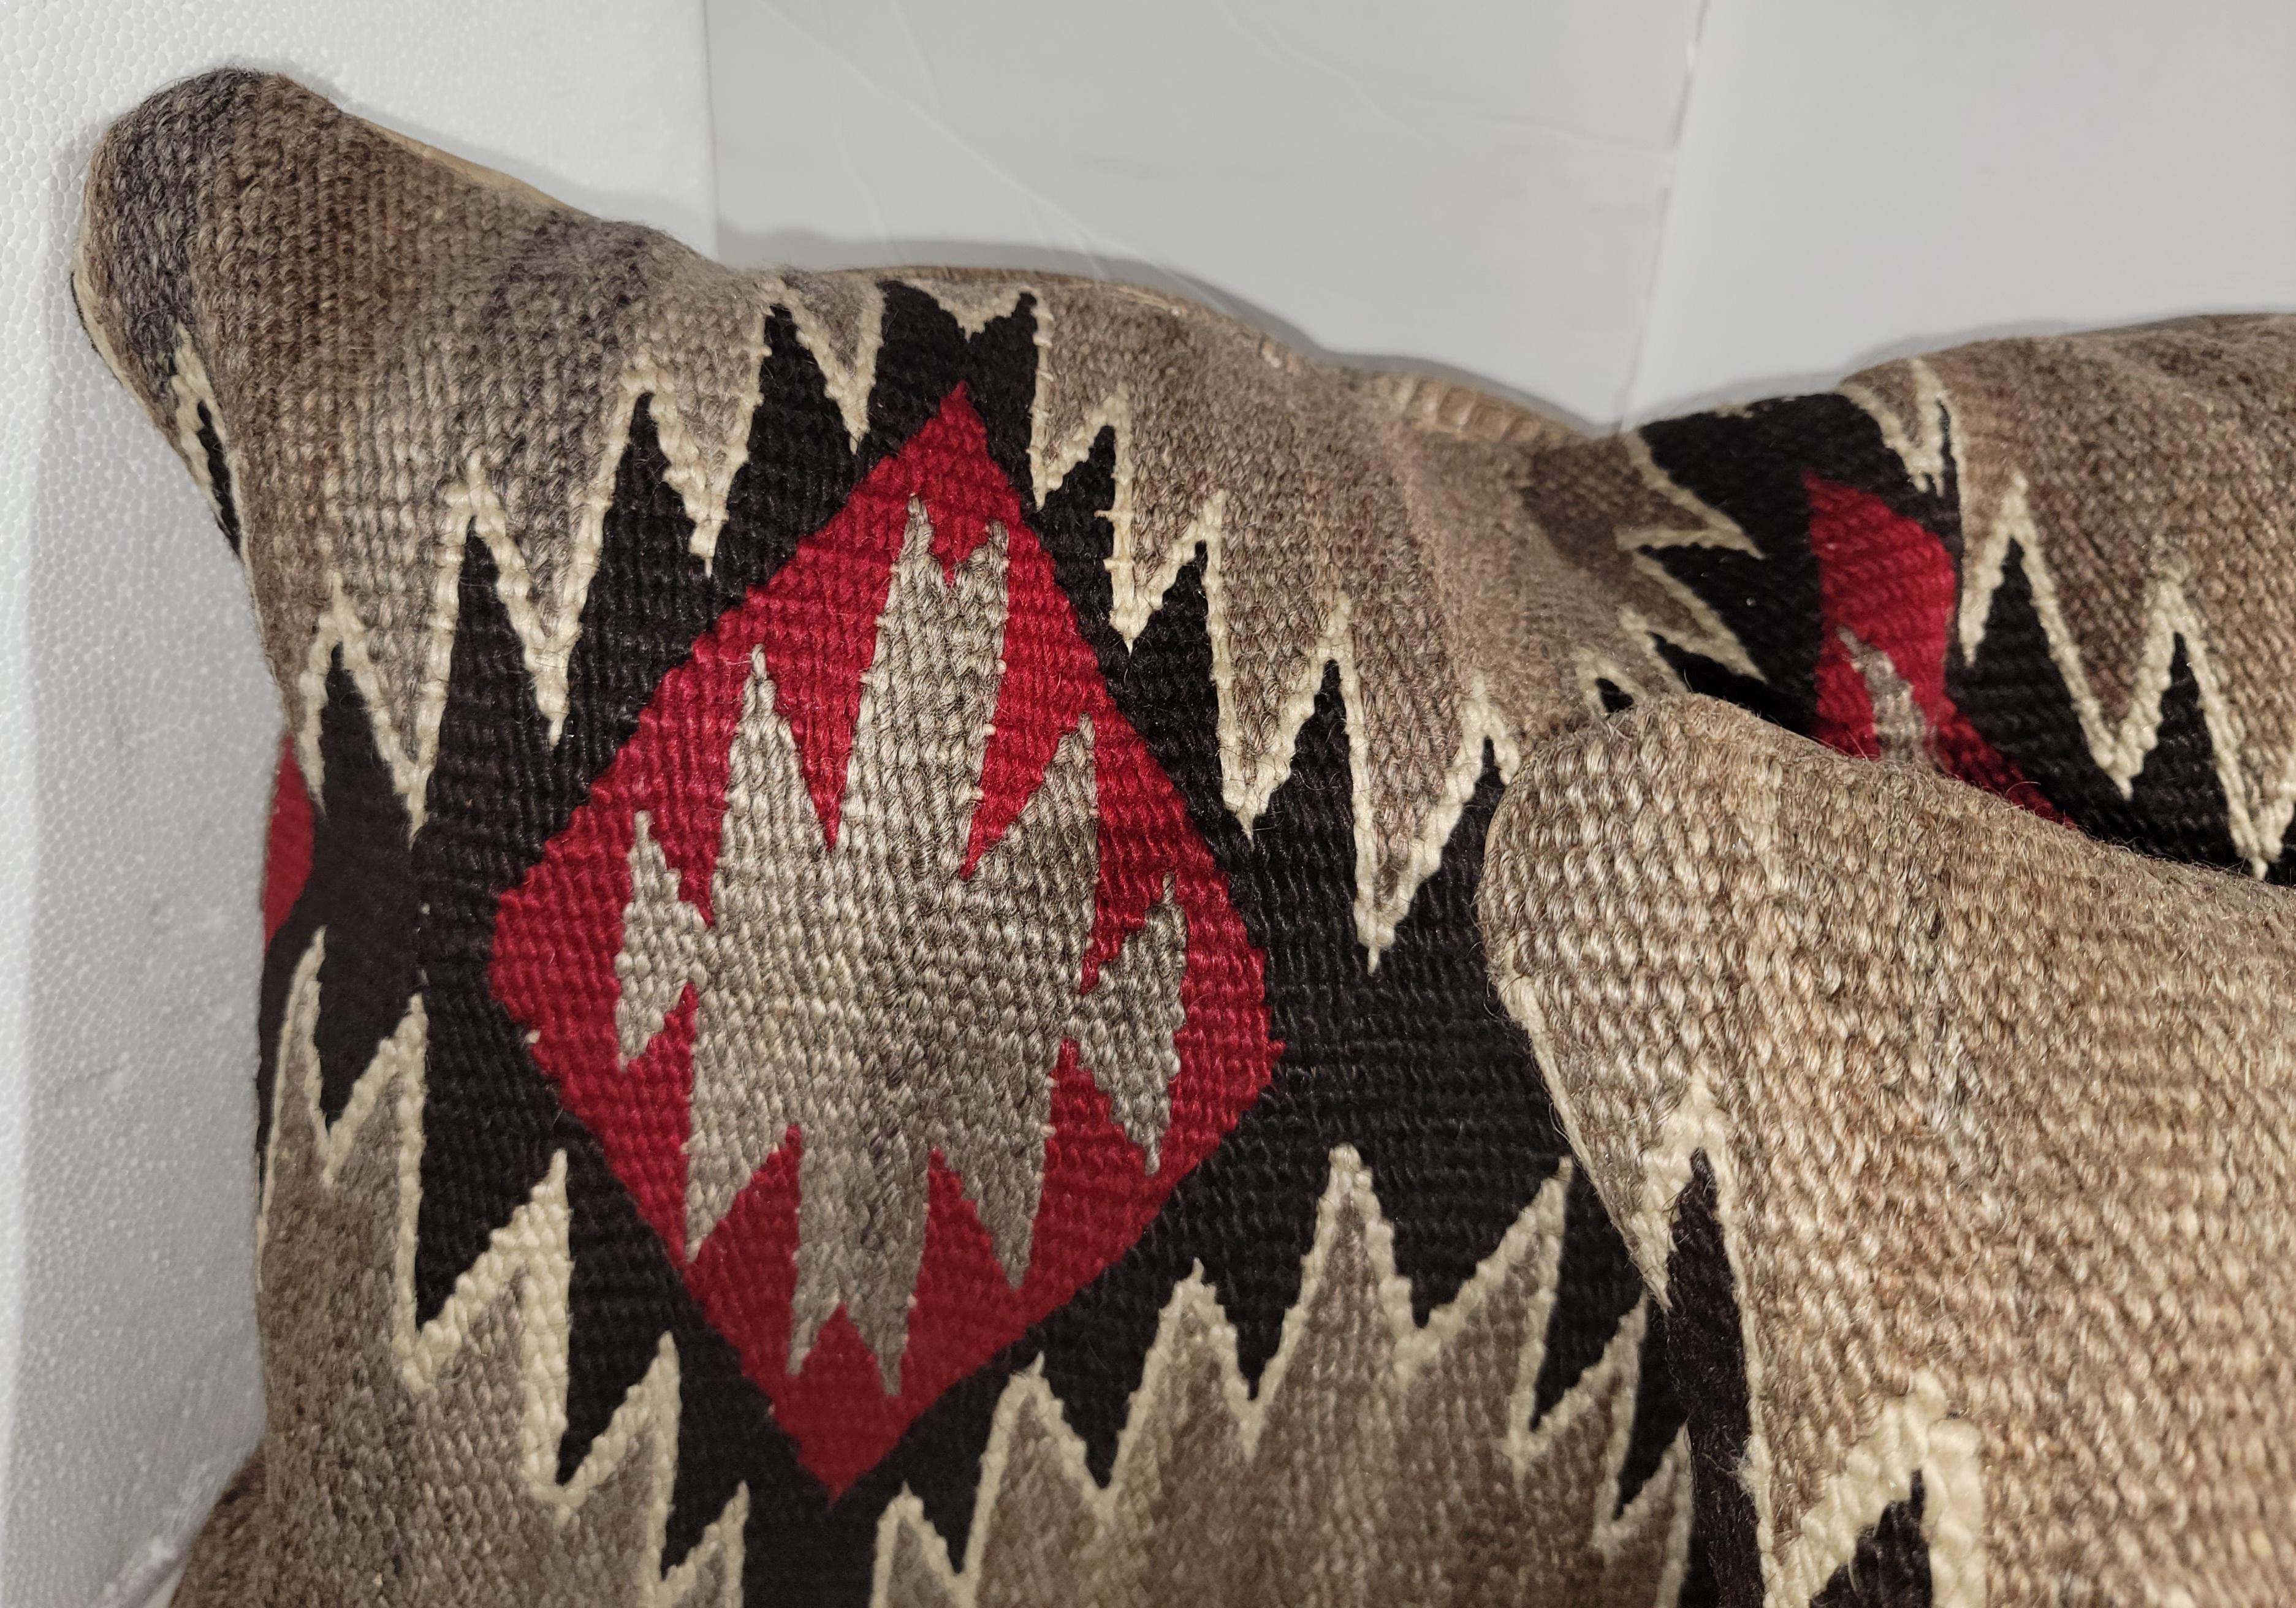 Navajo Indian weaving bolster pillows made from 19thc eye dazzler weaving and backed with distressed leather. The inserts are down & feather fill. Amazing weaving with great vibrant colors and down & feather filled.